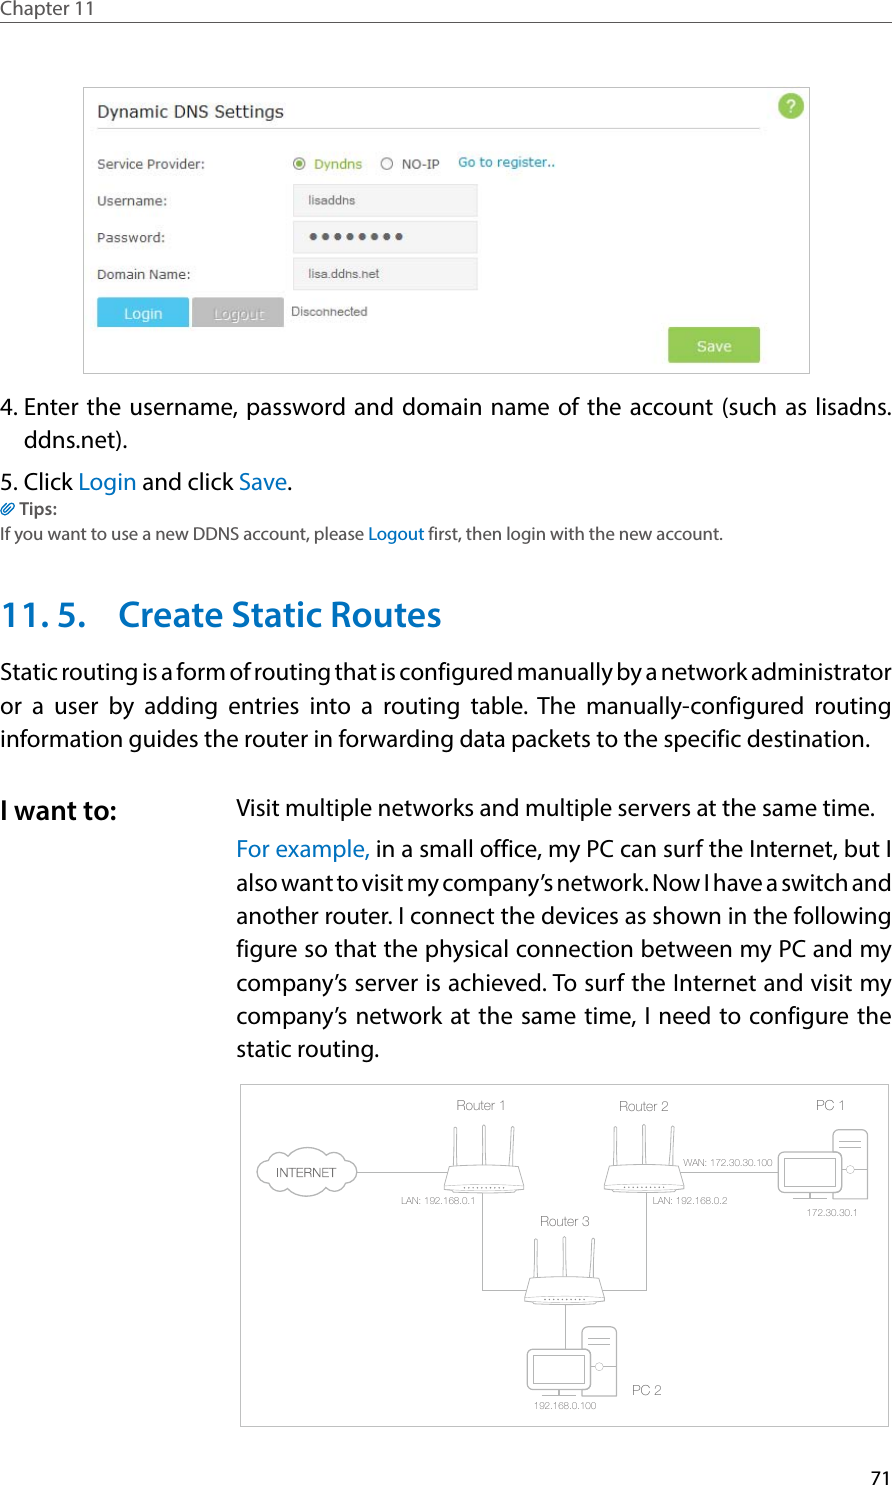 71Chapter 11  4. Enter the username, password and domain name of the account (such as lisadns.ddns.net).5. Click Login and click Save.Tips: If you want to use a new DDNS account, please Logout first, then login with the new account.11. 5.  Create Static RoutesStatic routing is a form of routing that is configured manually by a network administrator or a user by adding entries into a routing table. The manually-configured routing information guides the router in forwarding data packets to the specific destination.Visit multiple networks and multiple servers at the same time.For example, in a small office, my PC can surf the Internet, but I also want to visit my company’s network. Now I have a switch and another router. I connect the devices as shown in the following figure so that the physical connection between my PC and my company’s server is achieved. To surf the Internet and visit my company’s network at the same time, I need to configure the static routing.PC 1PC 2Router 2Router 1Router 3LAN: 192.168.0.1192.168.0.100LAN: 192.168.0.2WAN: 172.30.30.100172.30.30.1I want to: